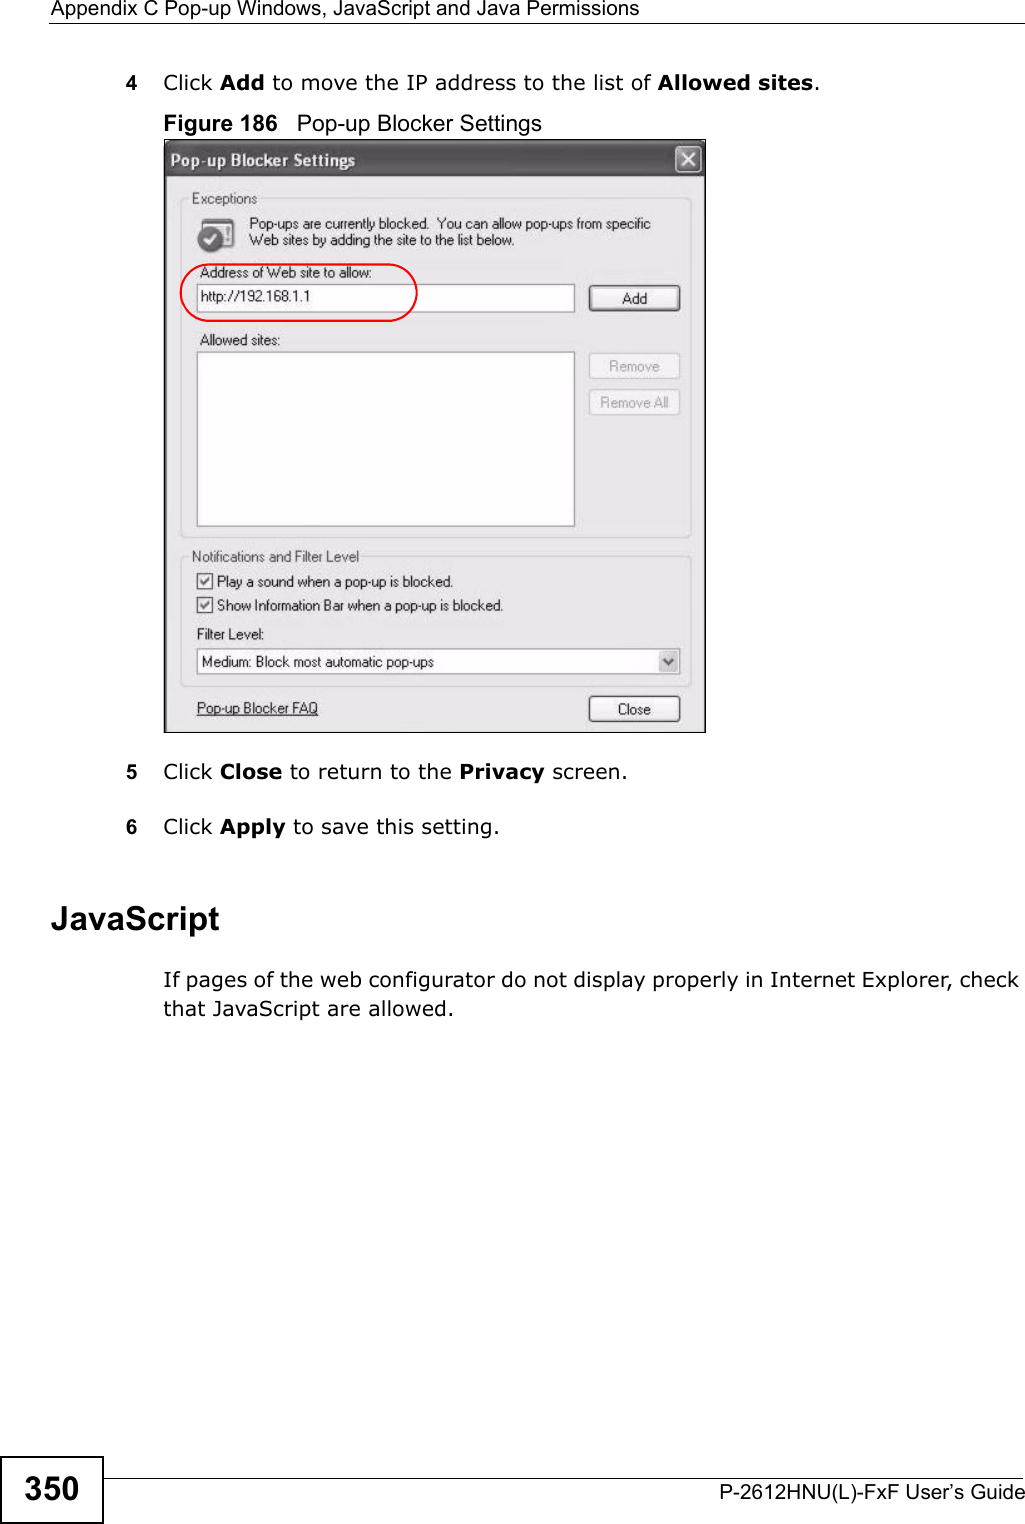 Appendix C Pop-up Windows, JavaScript and Java PermissionsP-2612HNU(L)-FxF User’s Guide3504Click Add to move the IP address to the list of Allowed sites.Figure 186   Pop-up Blocker Settings5Click Close to return to the Privacy screen. 6Click Apply to save this setting.JavaScriptIf pages of the web configurator do not display properly in Internet Explorer, check that JavaScript are allowed. 